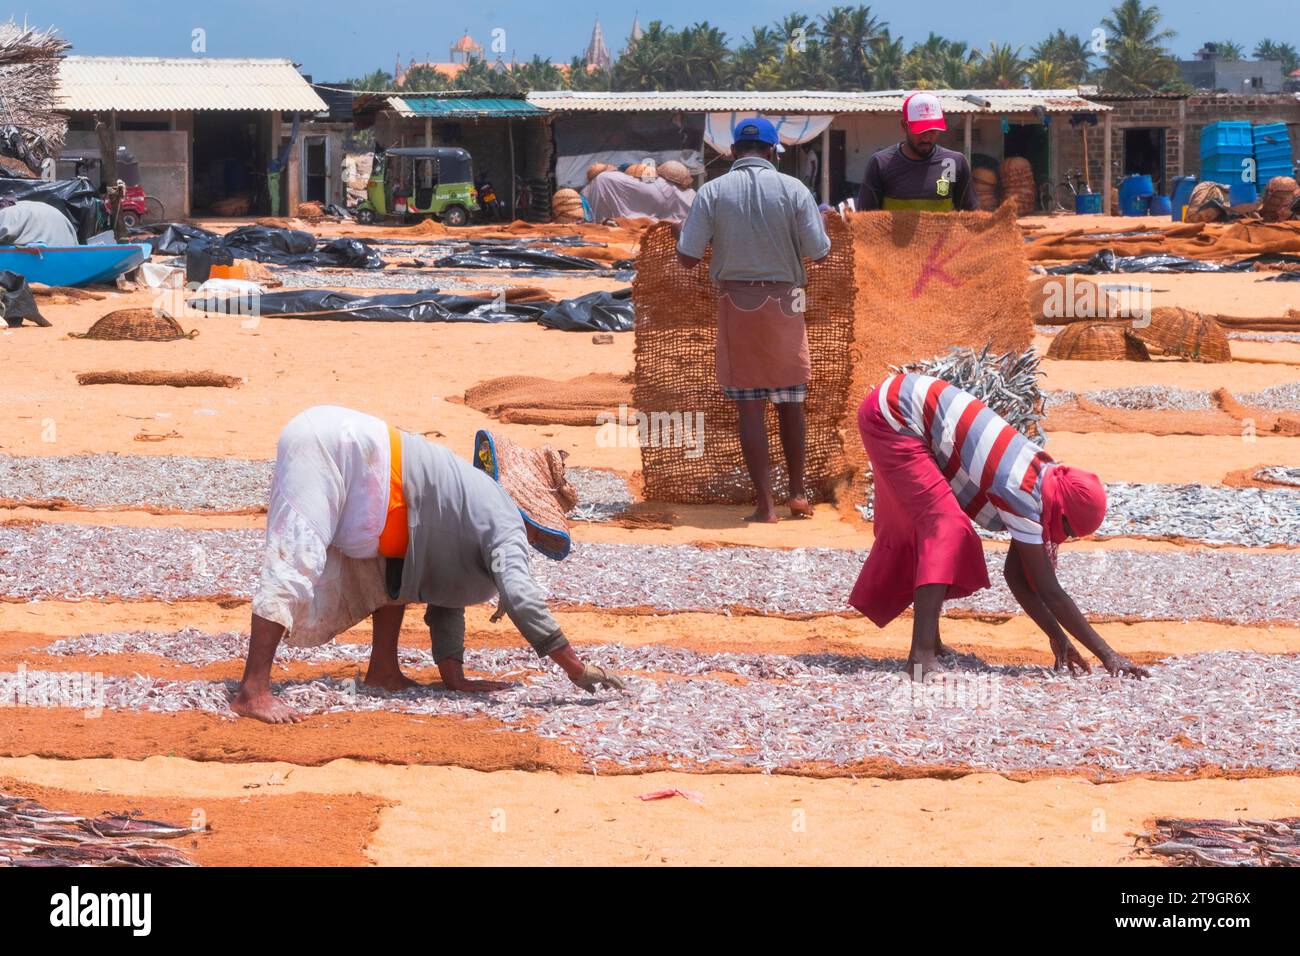 Two older women are bent over spreading out small fish on mats to dry out in the sunlight in Negombo in Sri Lanka Stock Photo